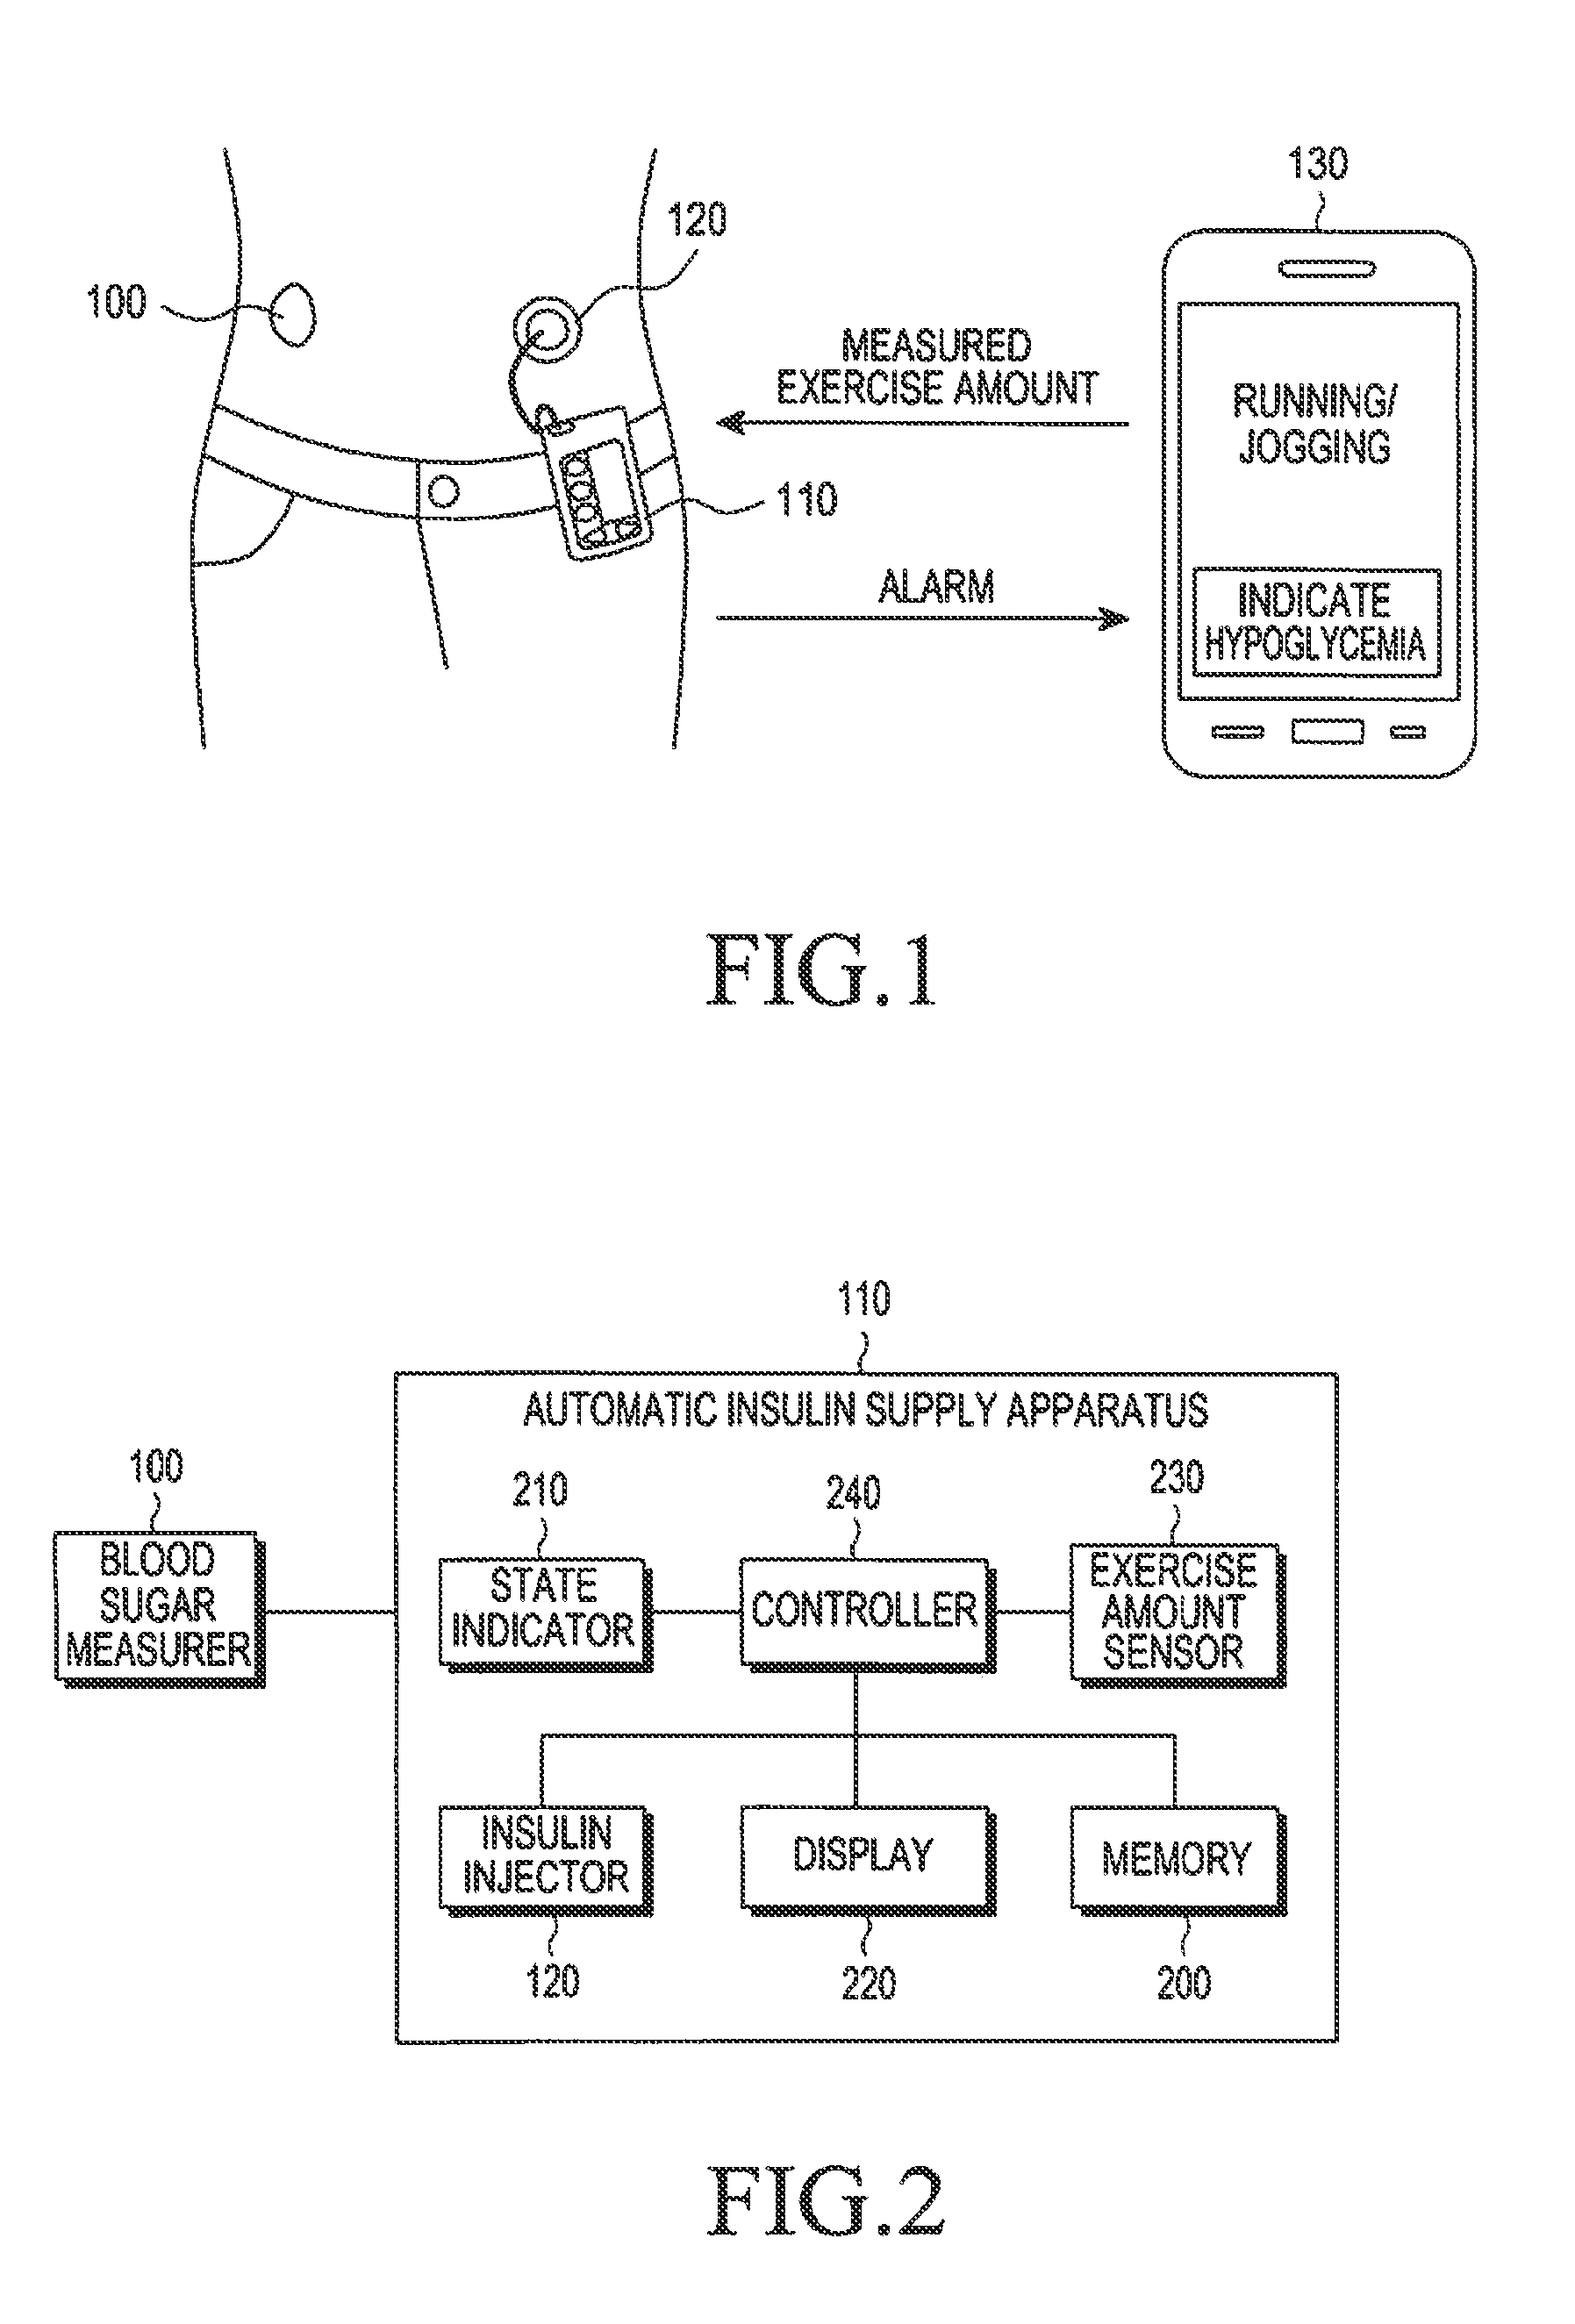 Apparatus and method for automatically supplying insulin based on amount of exercise